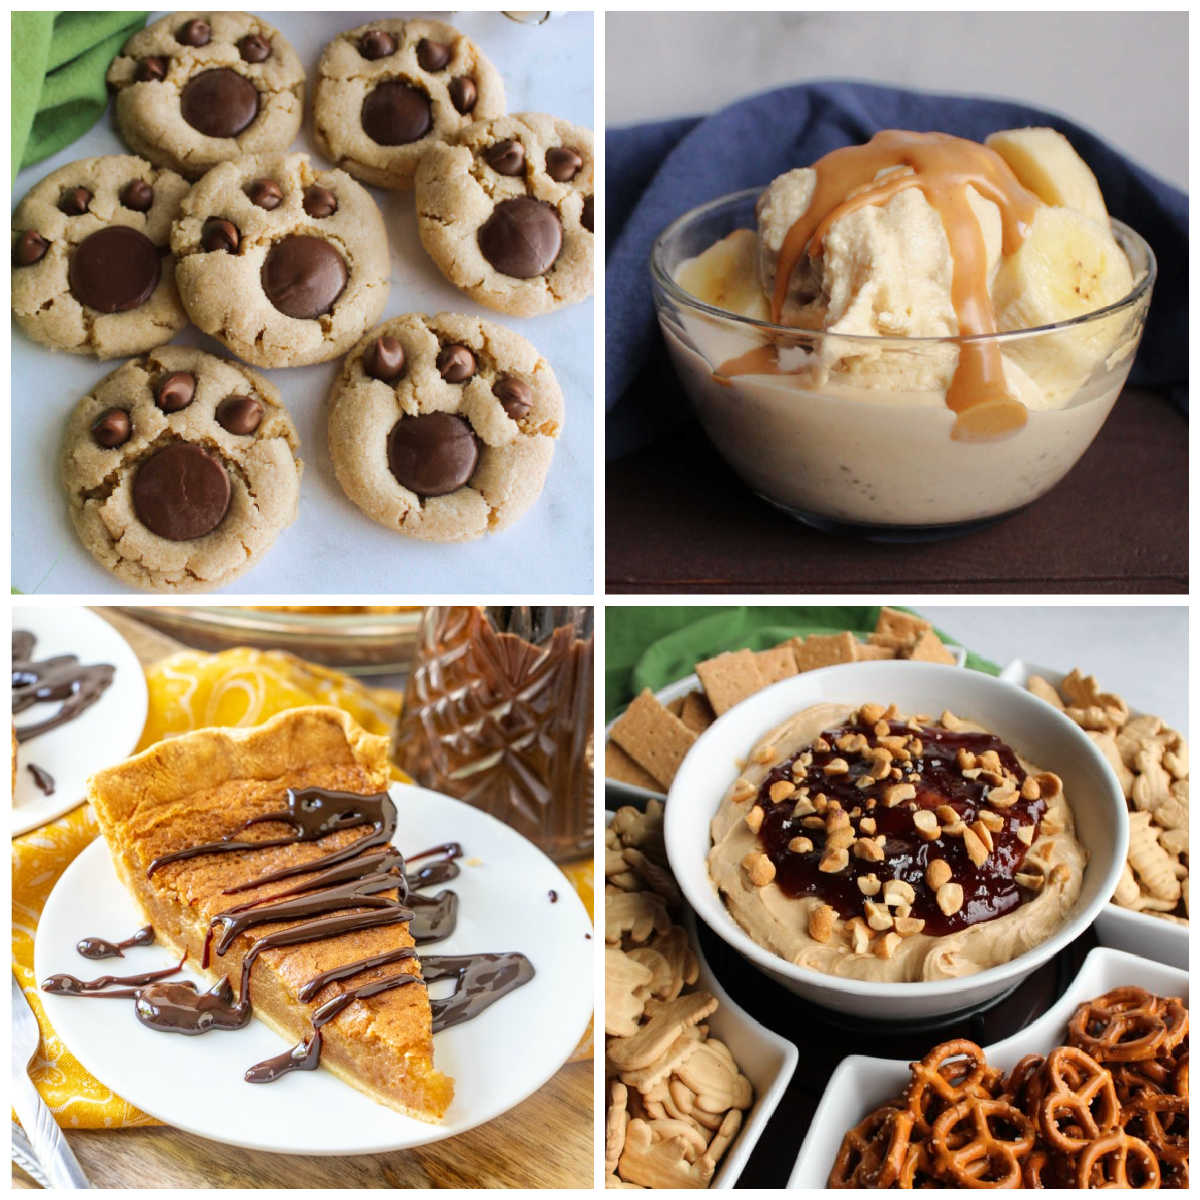 collage of peanut butter foods including peanut butter paw print cookies, peanut butter banana ice cream with peanut butter magic shell, peanut butter and jelly dip, and baked peanut butter pie.